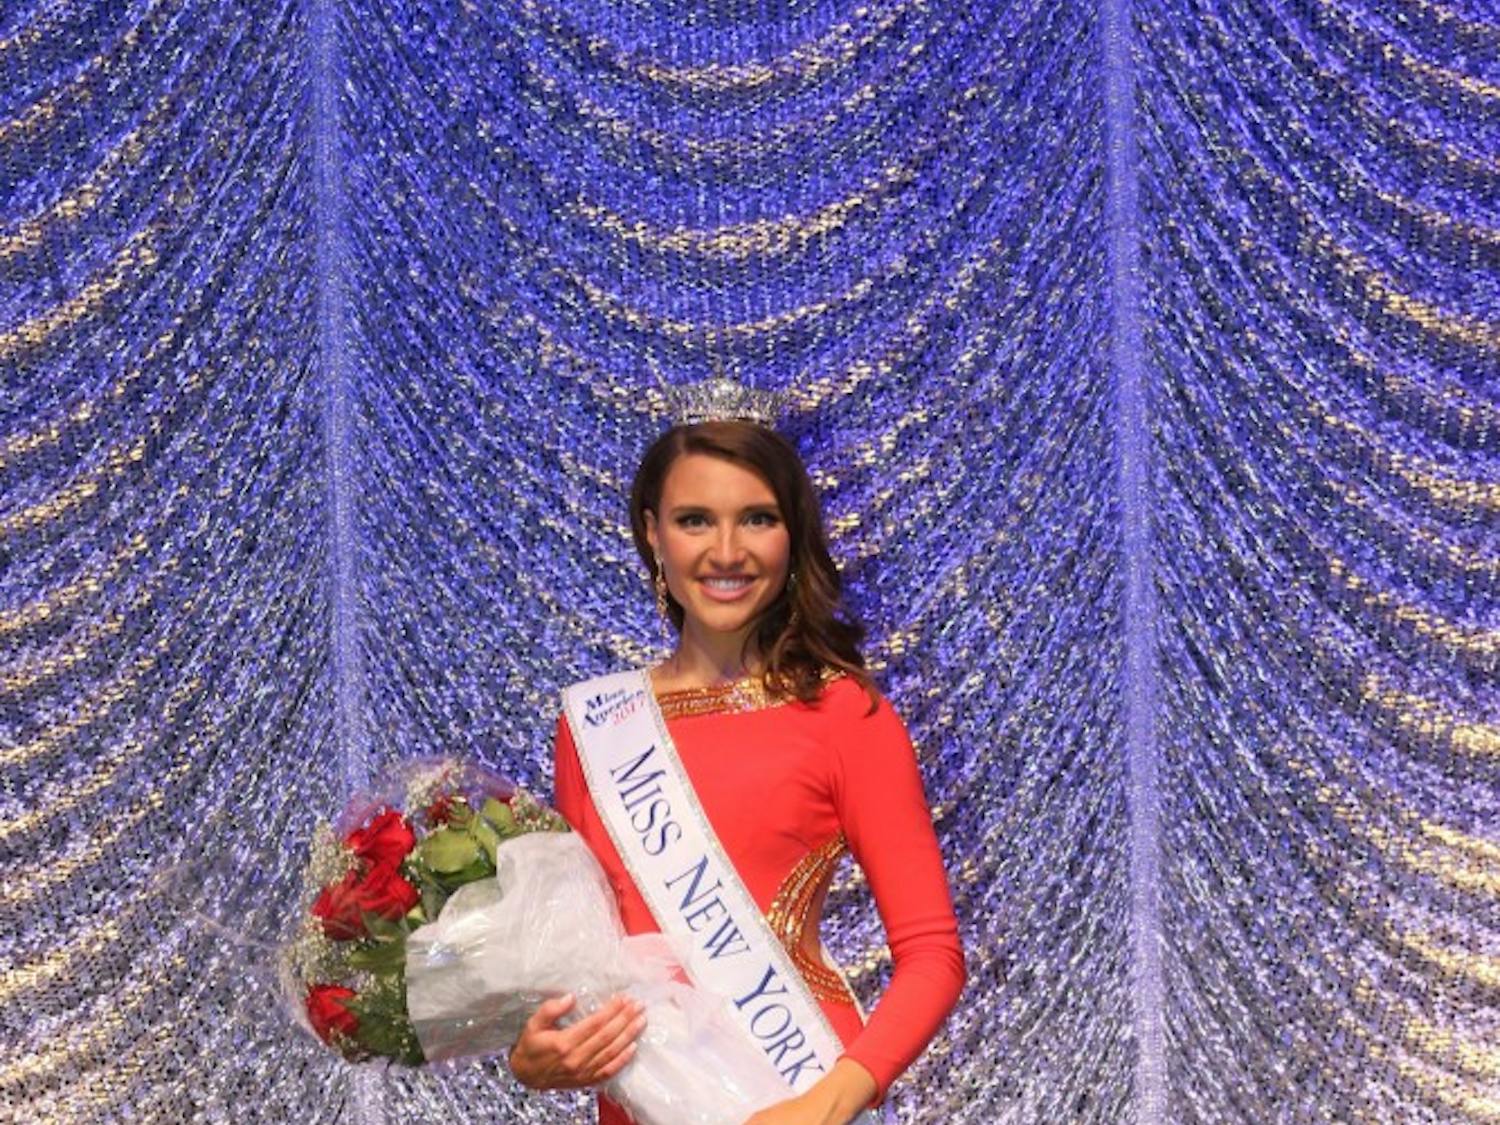 UB law student Gabrielle Walter wins this year's Miss NY Competition and aims to compete in the Miss America competition this September.&nbsp;